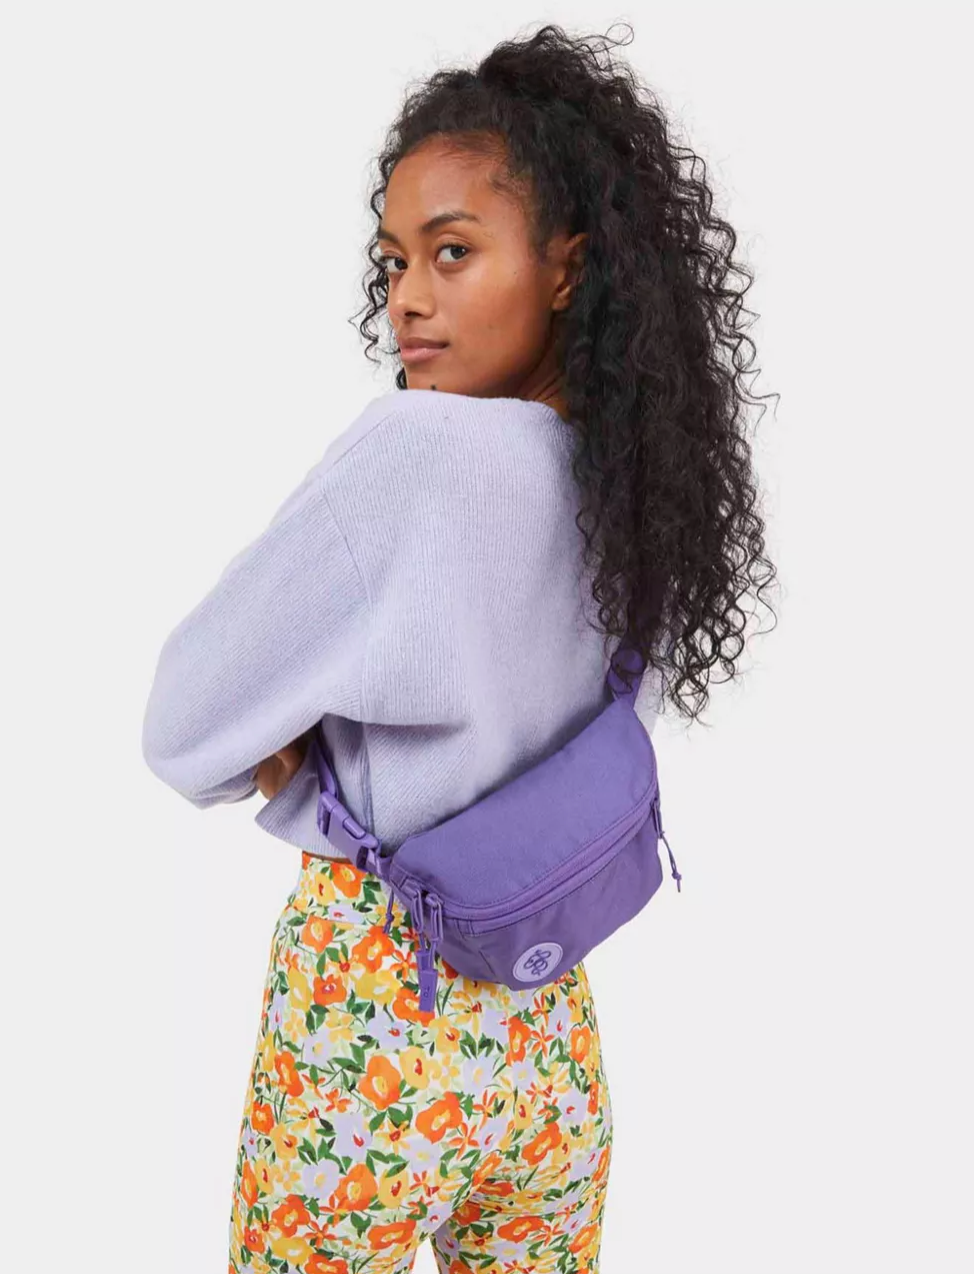 High-Fashion Fanny Packs To Add To Your 2022 Wish List